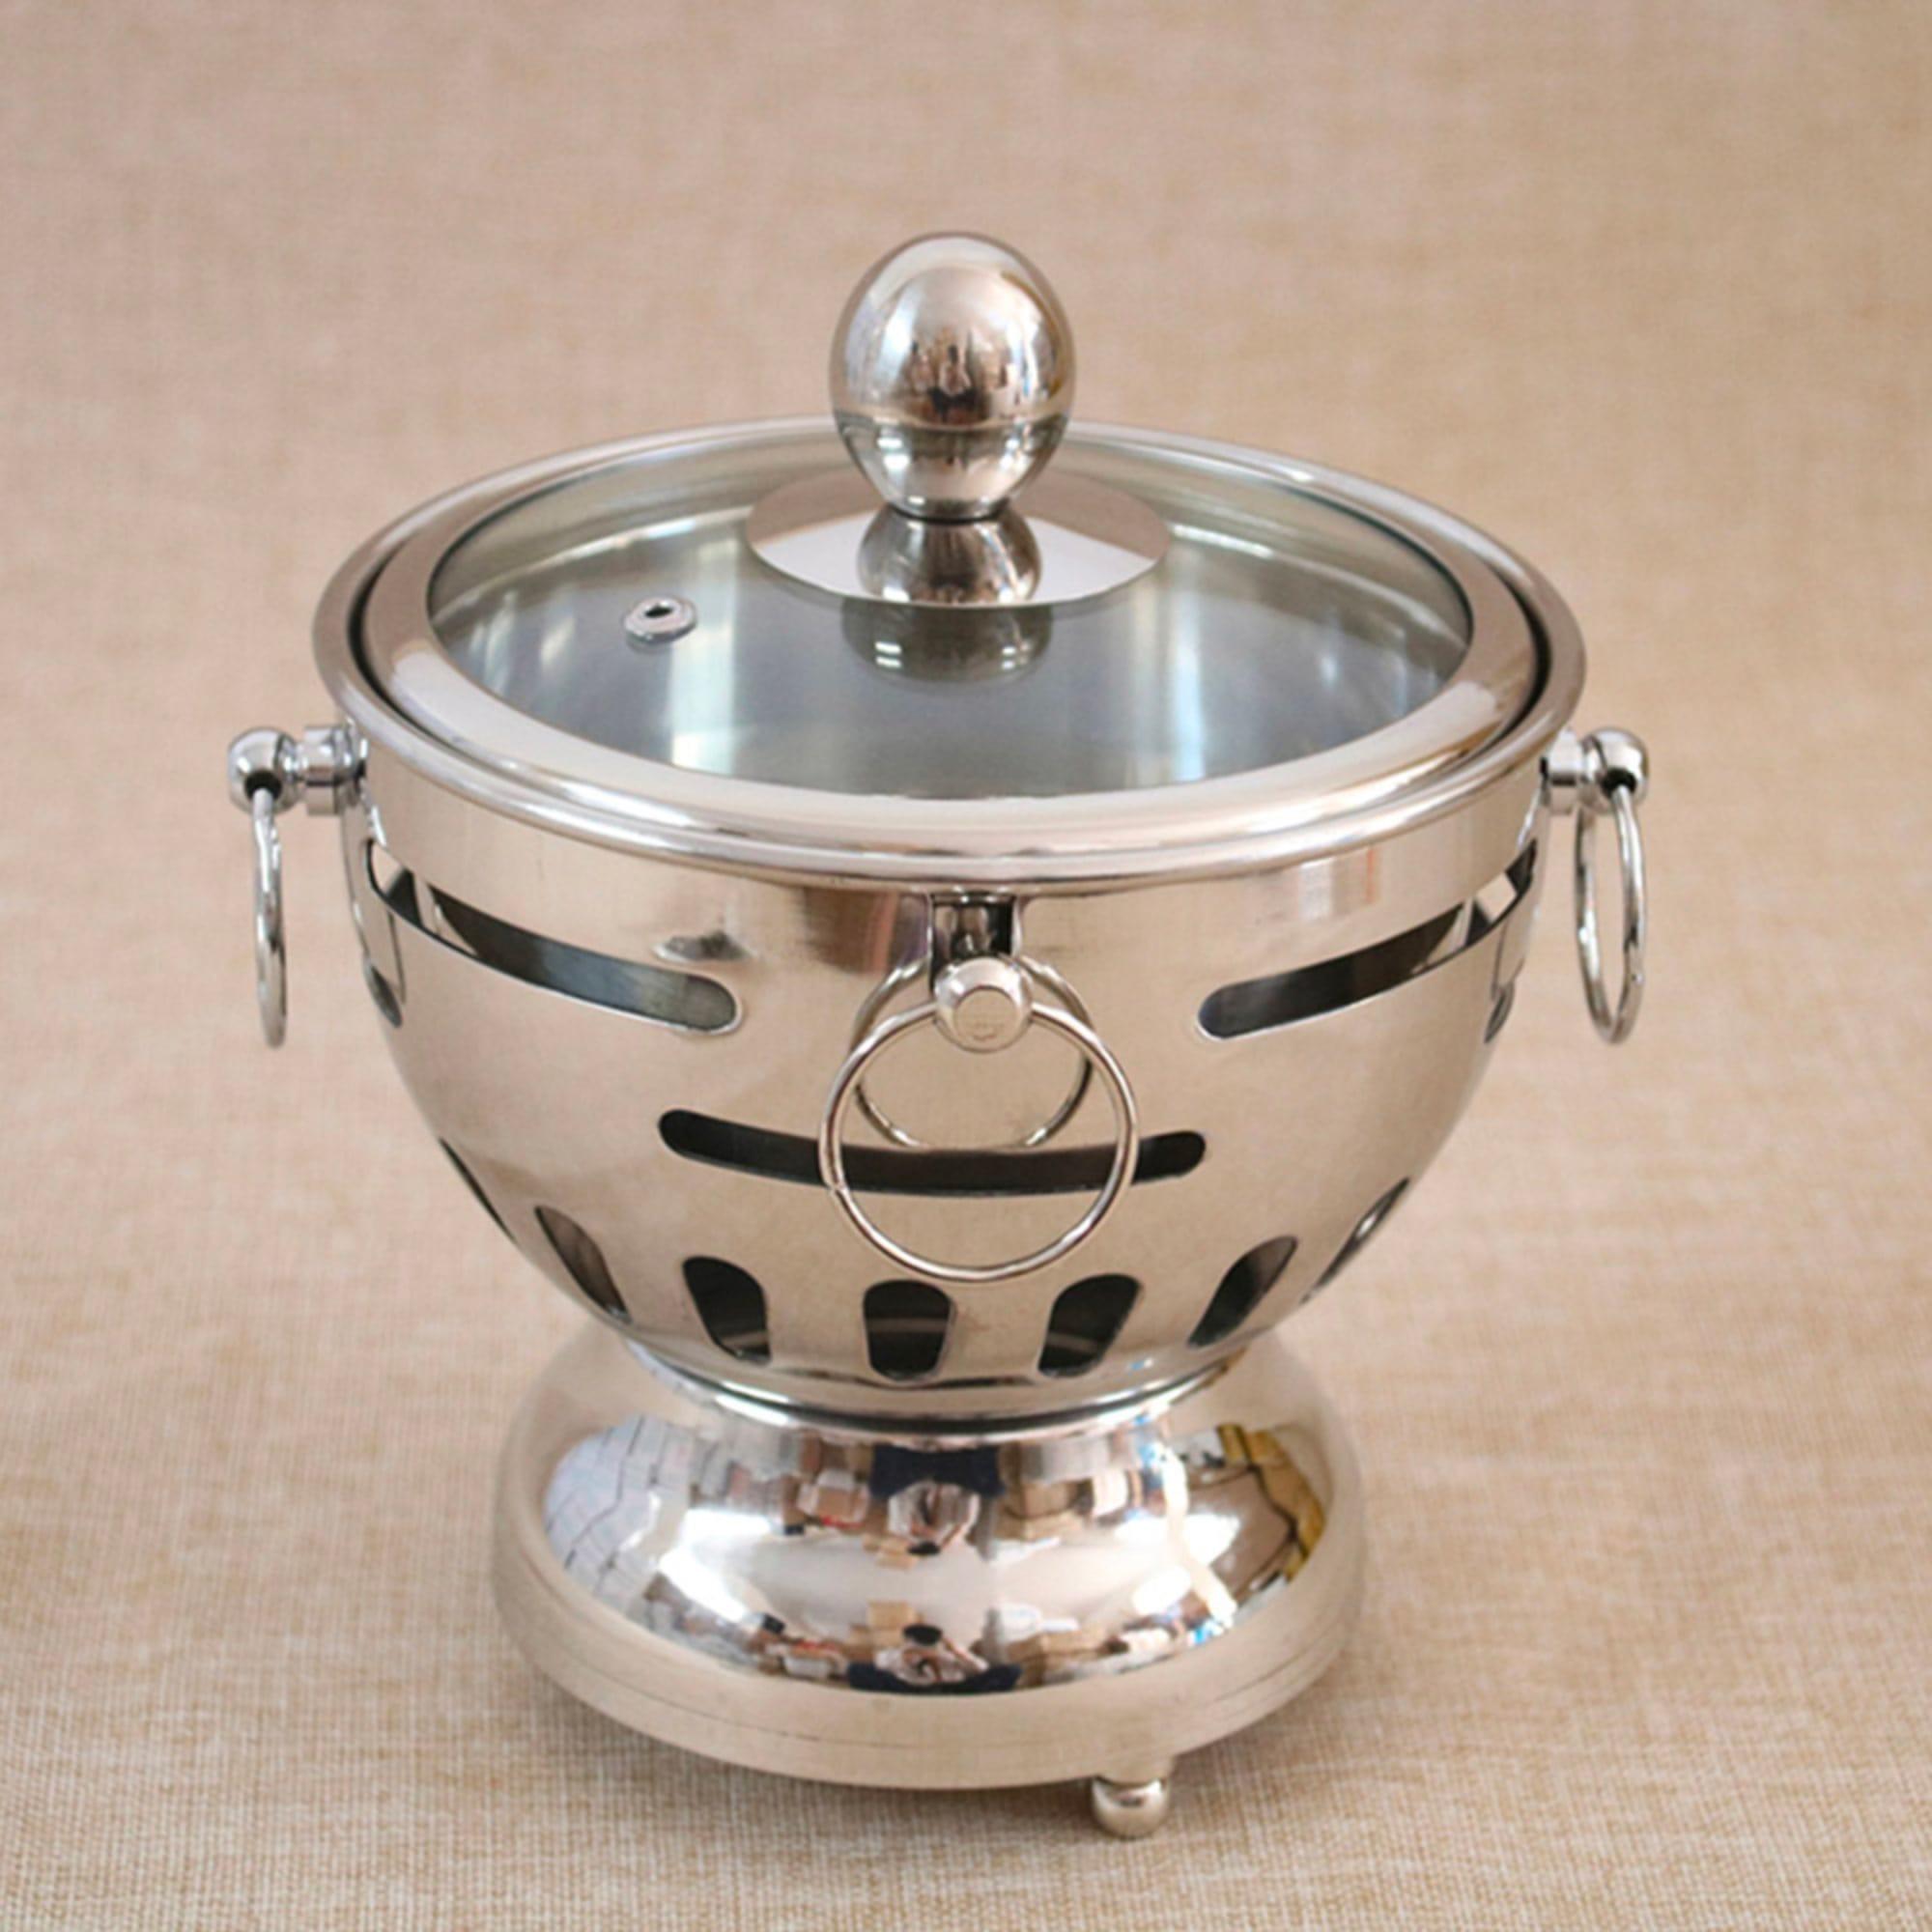 Soga Round Stainless Steel Single Hot Pot with Glass Lid 18.5cm Set of 2 Image 4